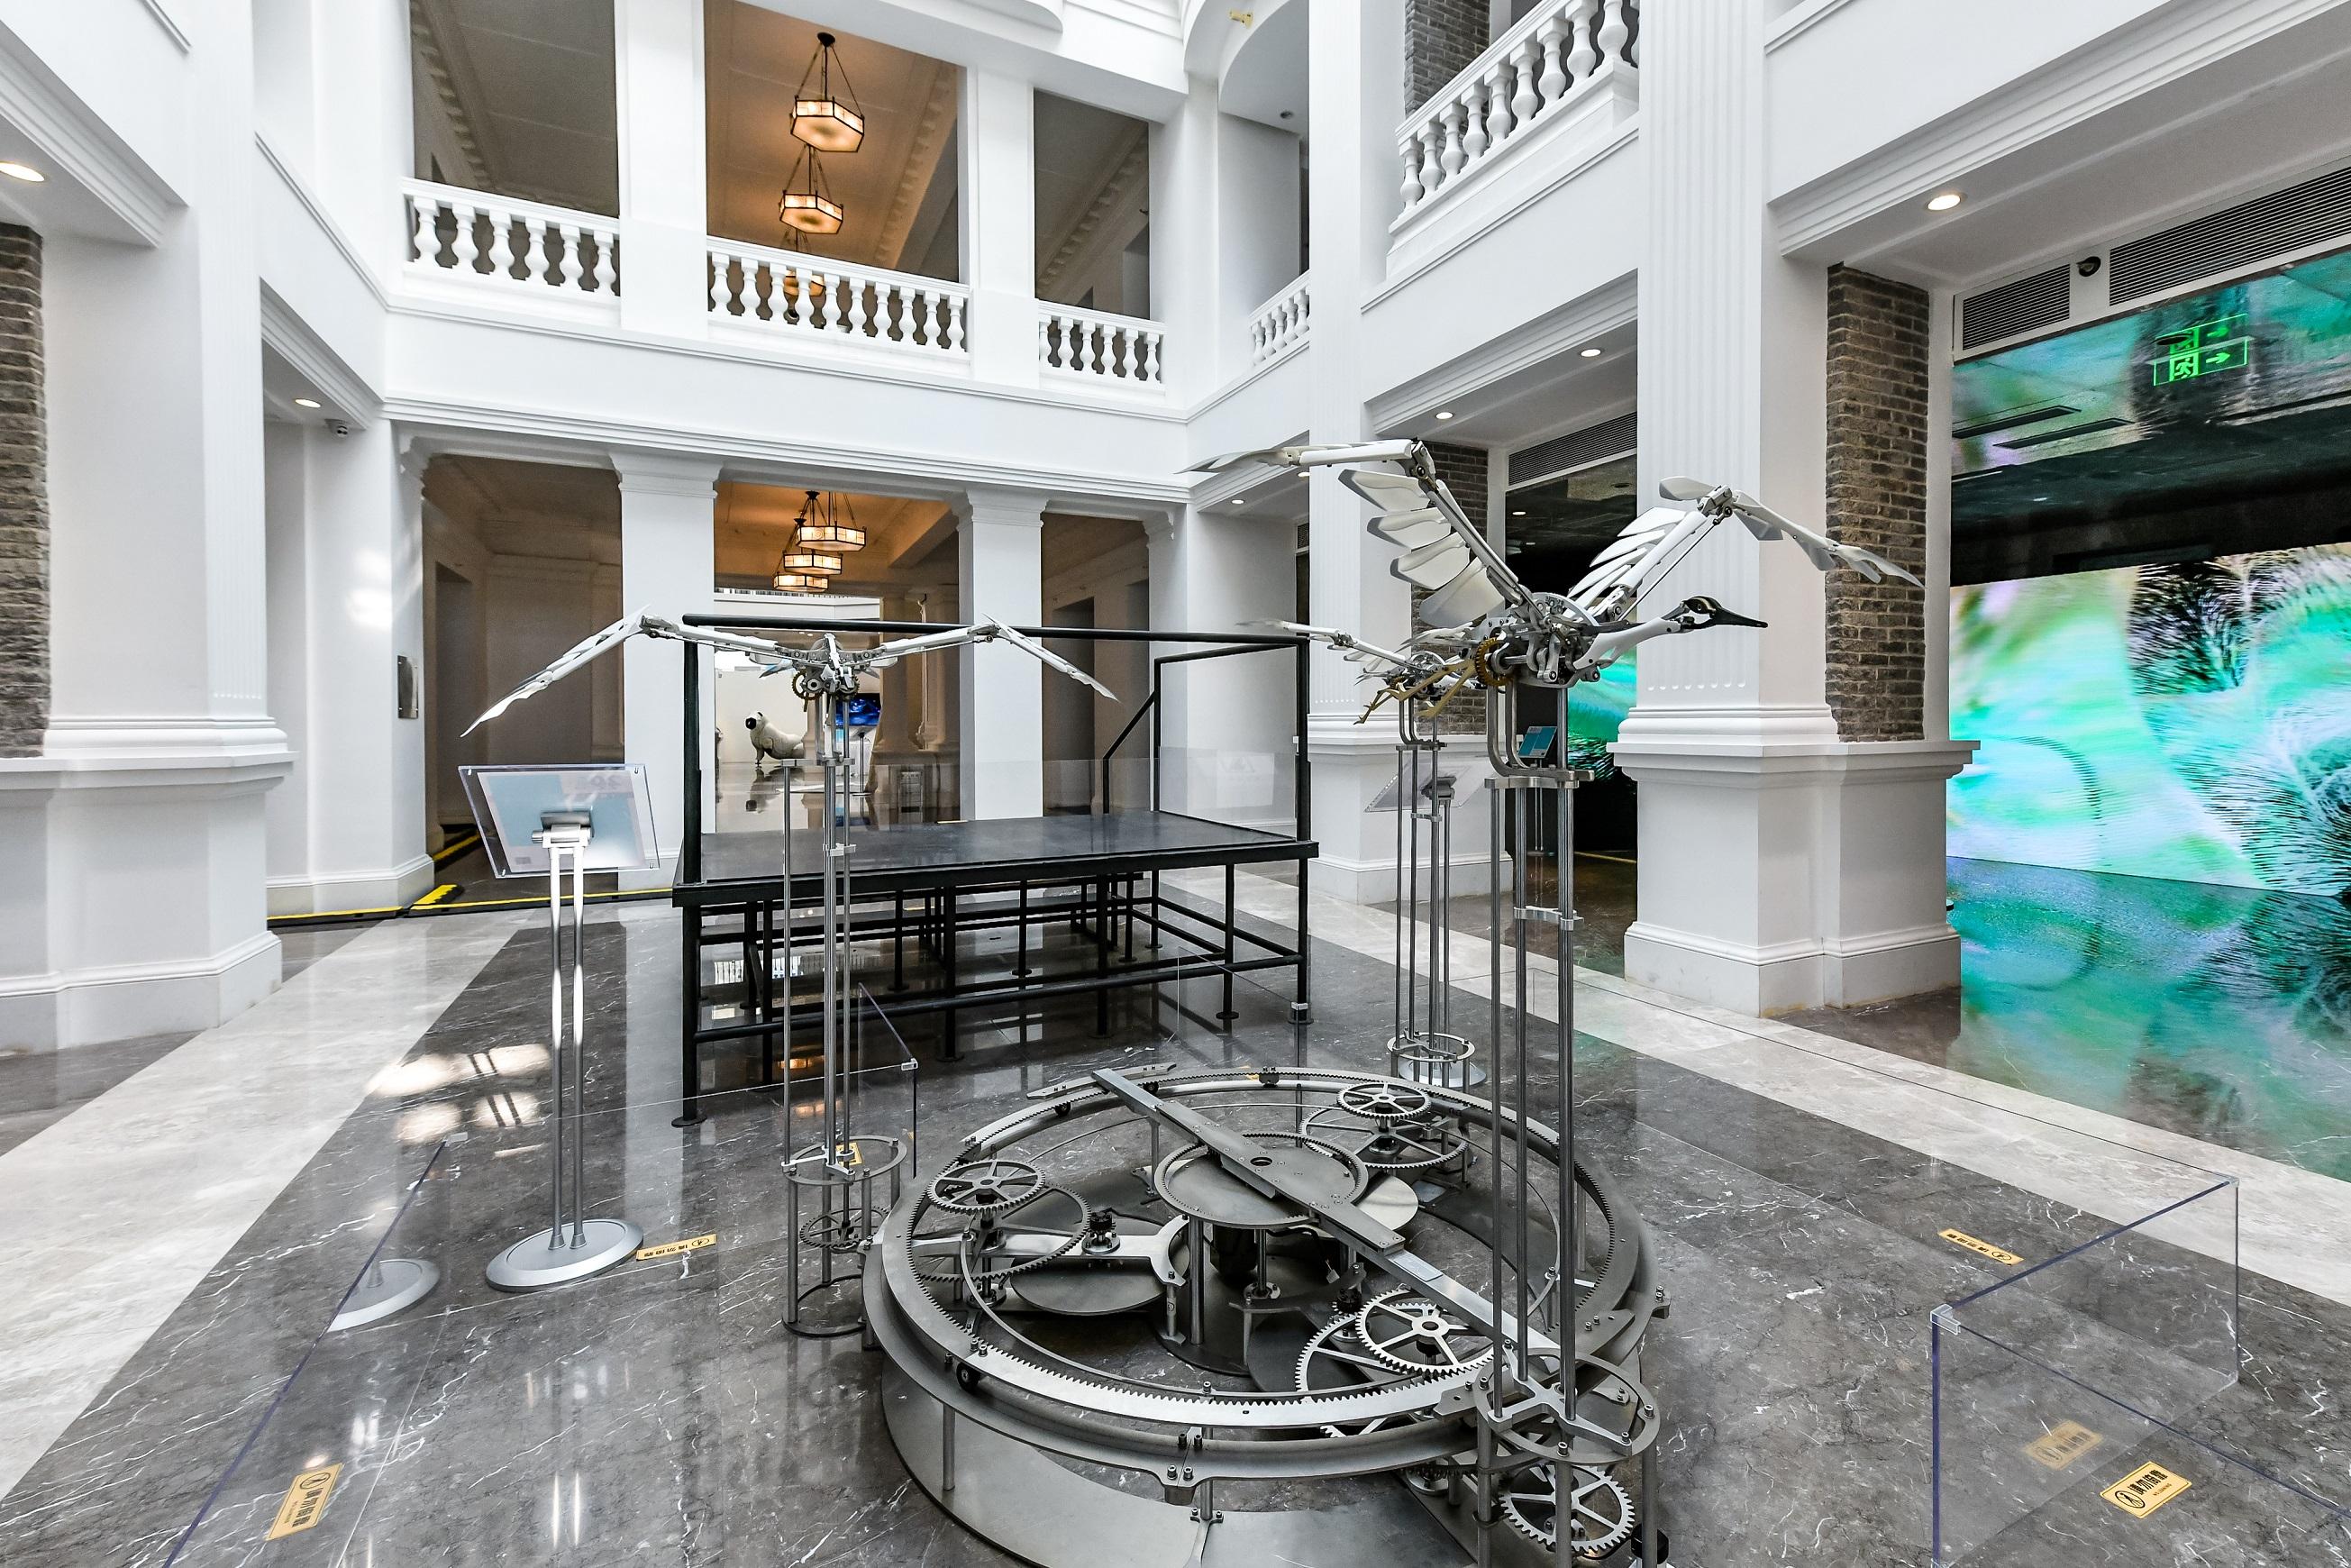 The "2022 Hong Kong-Macao Visual Art Biennale" is being held at the Beijing Quanyechang Cultural Arts Centre. Photo shows Hong Kong artist Joseph Chan's kinetic installation, "Migratory birds", a large mechanical bird installation inspired by the ecology in nature. 